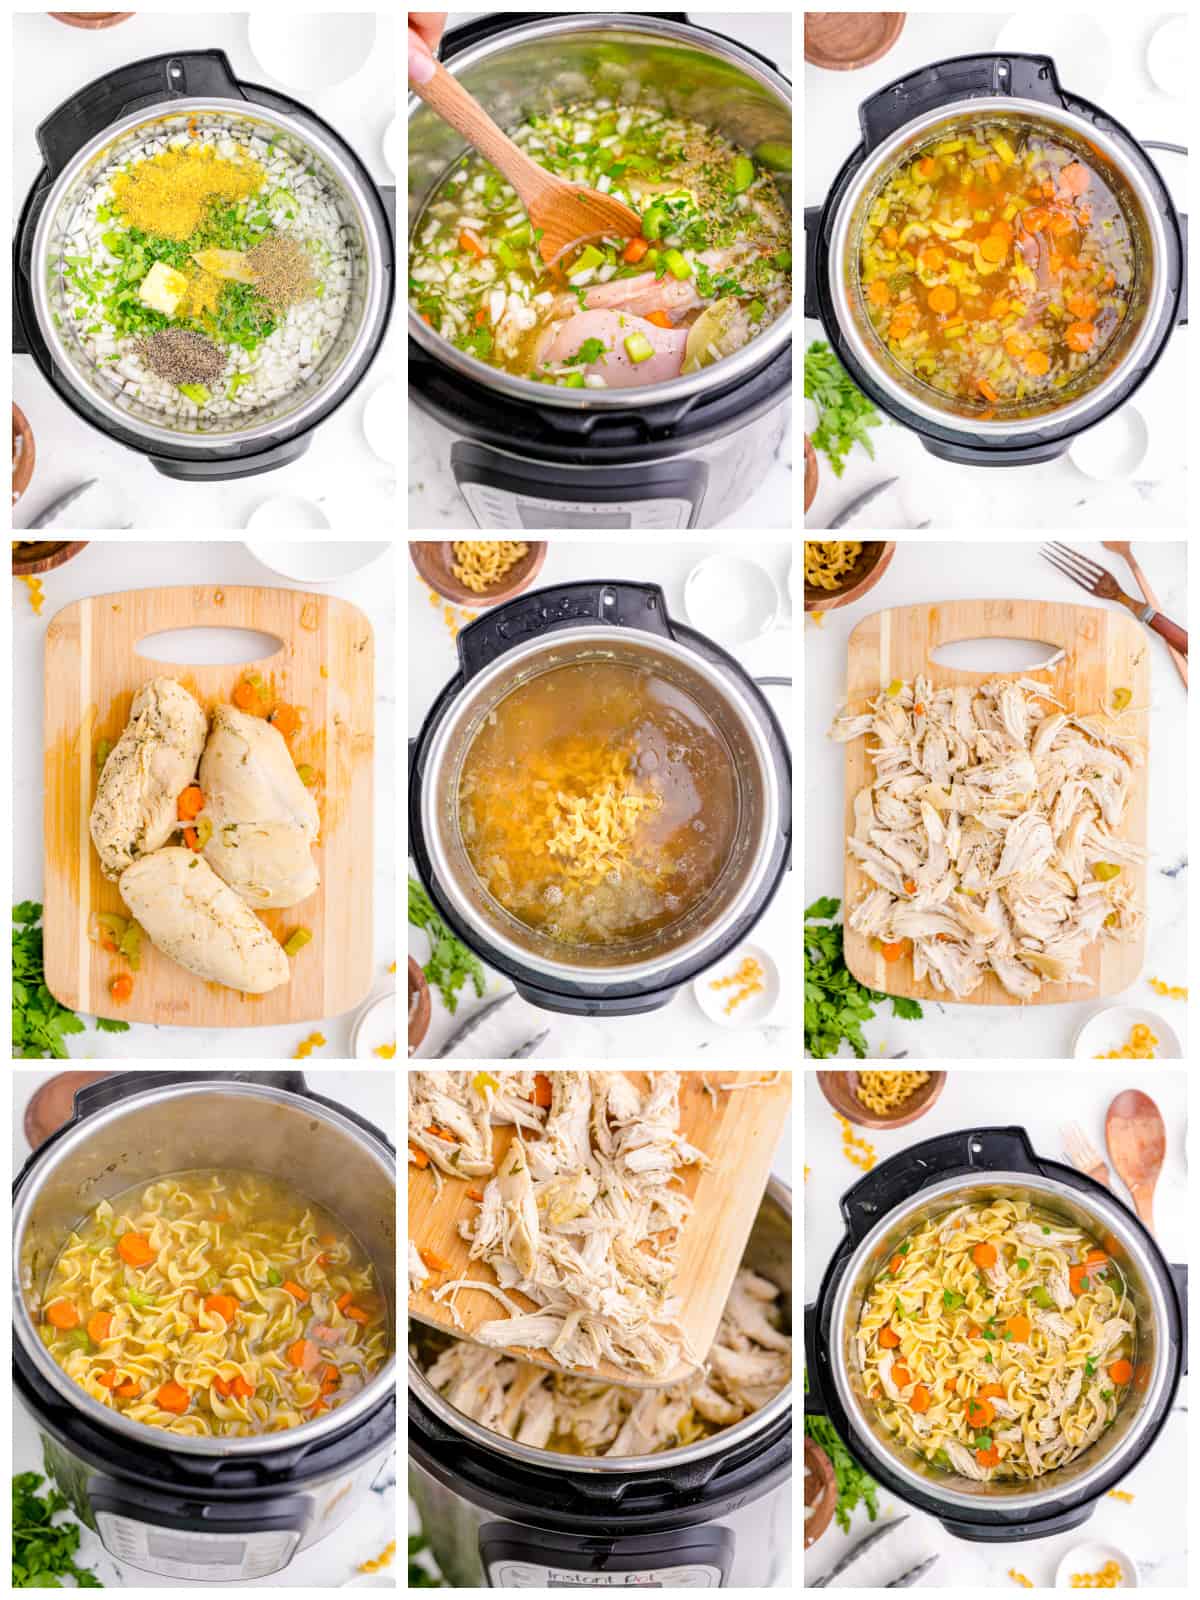 Step by step photos on how to make Instant Pot Chicken Noodle Soup.